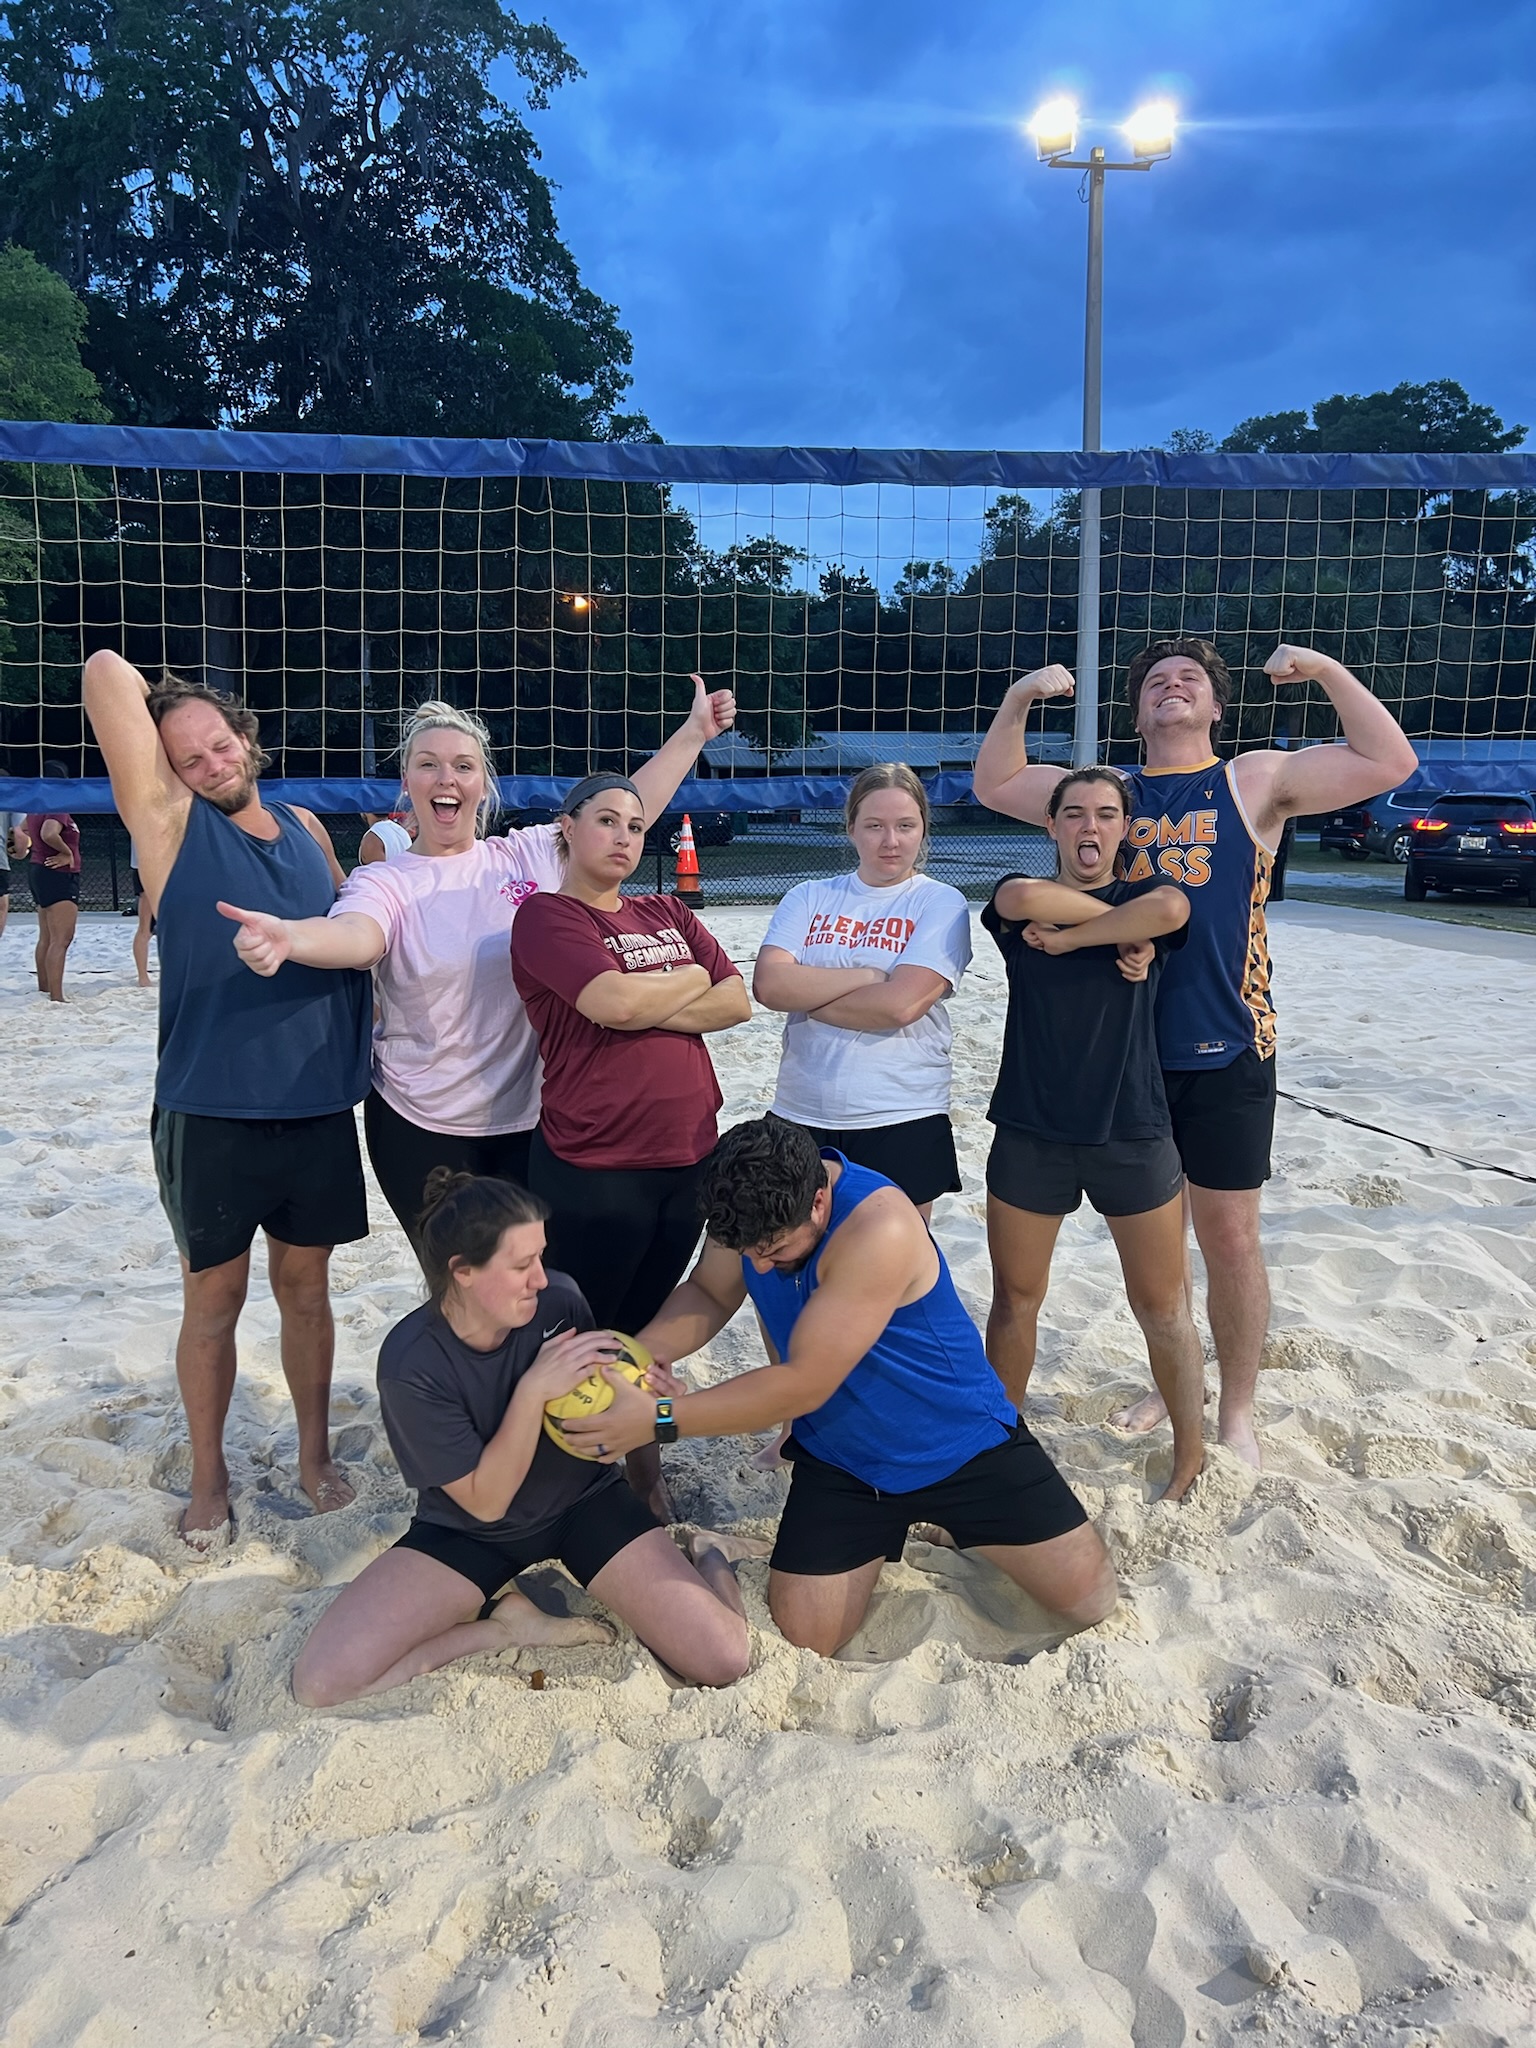 adult volleyball team enjoying the league